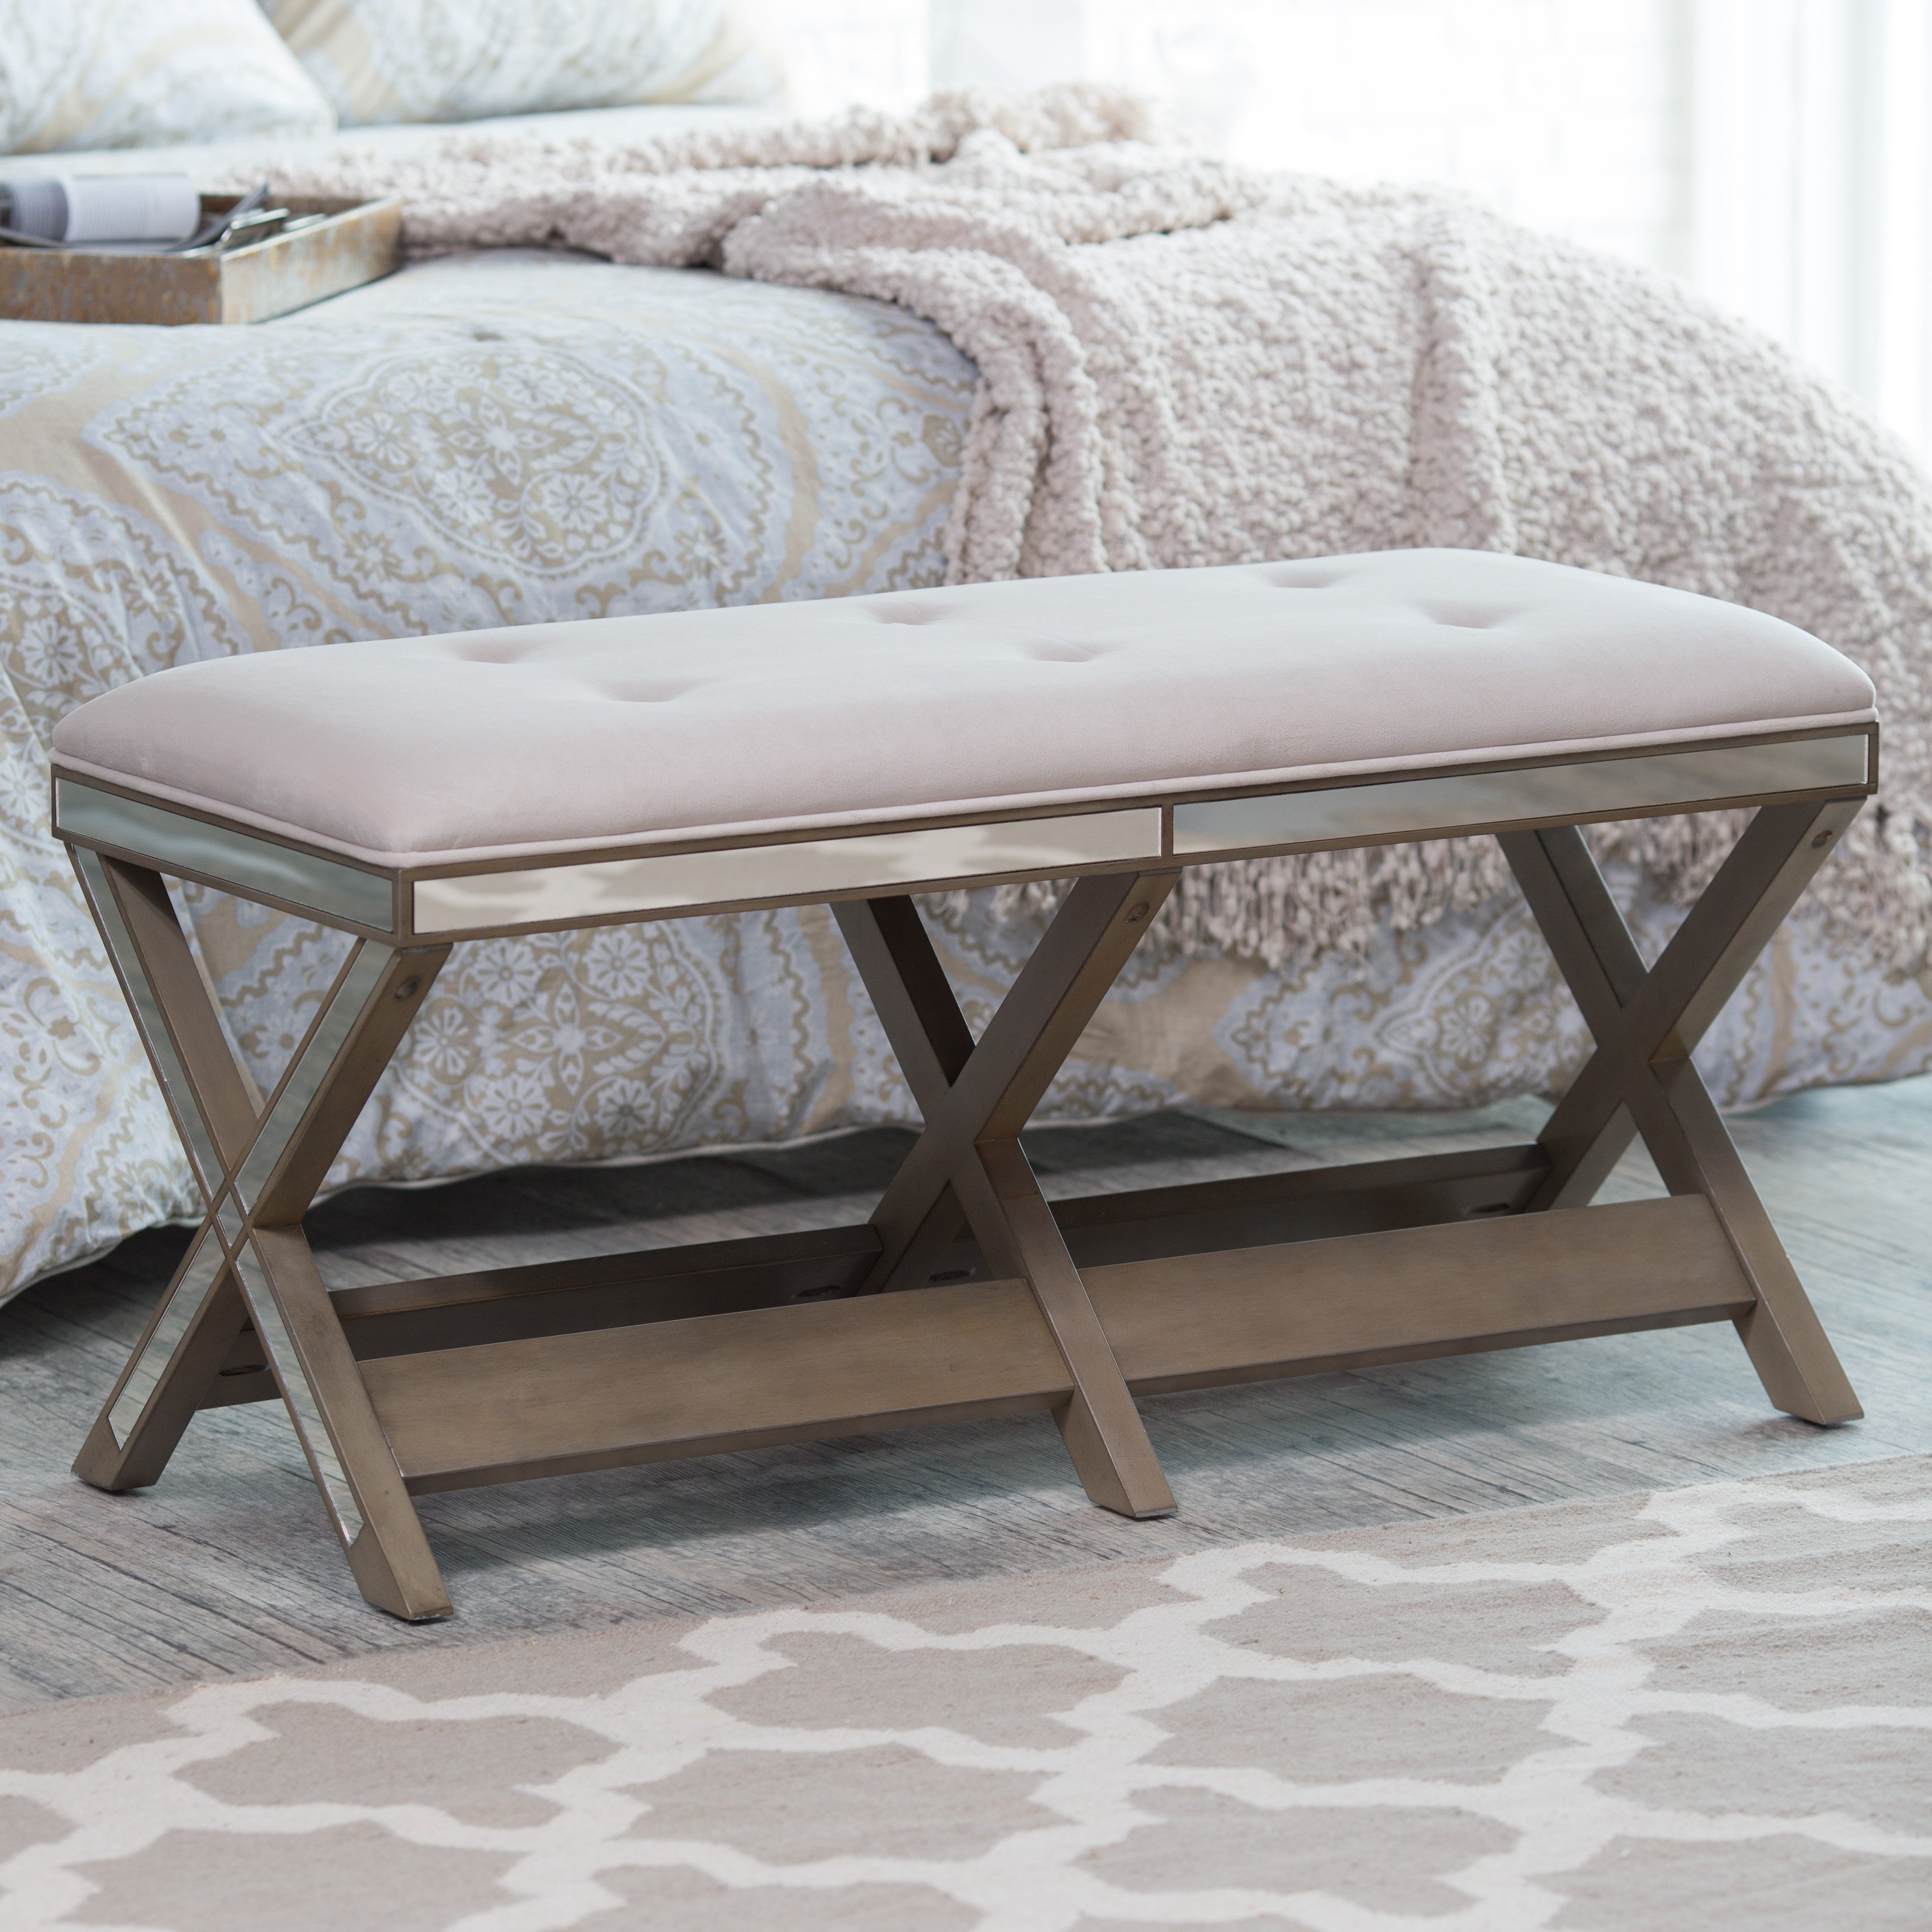 All About The Bedroom Upholstered Bench: Styles And Benefits